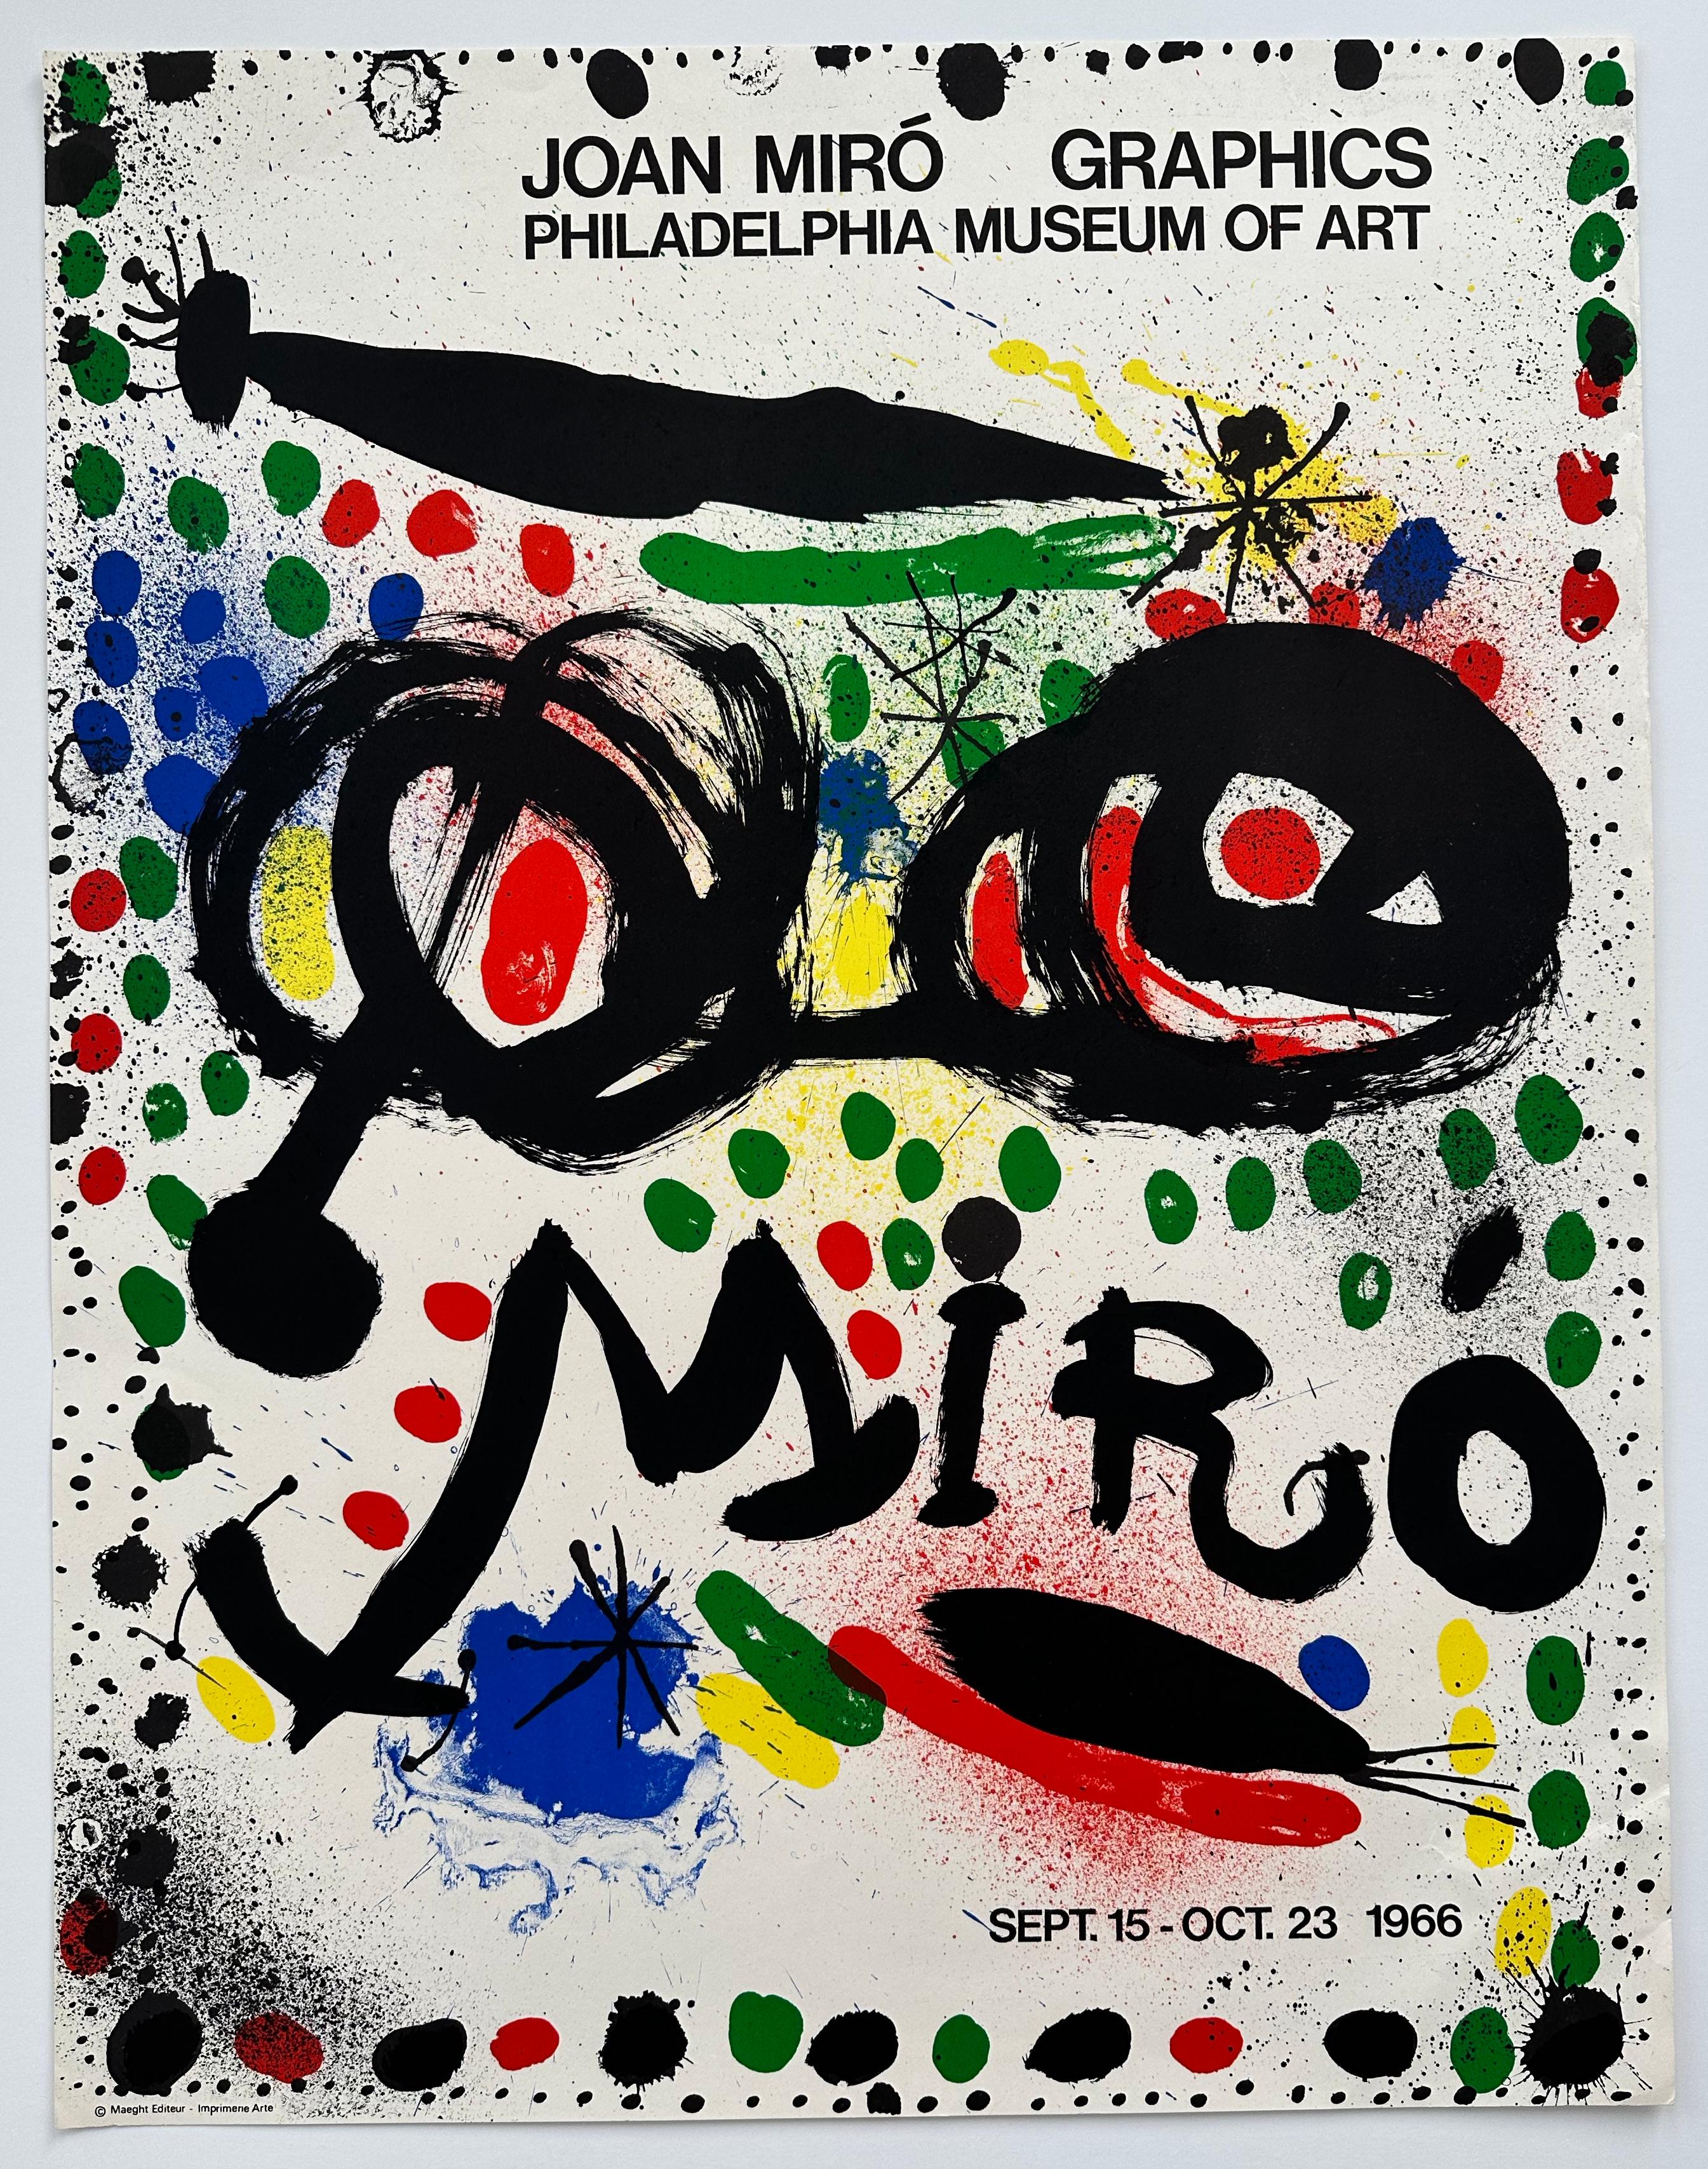 (after) Joan Miró Abstract Print - 1966 Exhibition Poster Philadelphia